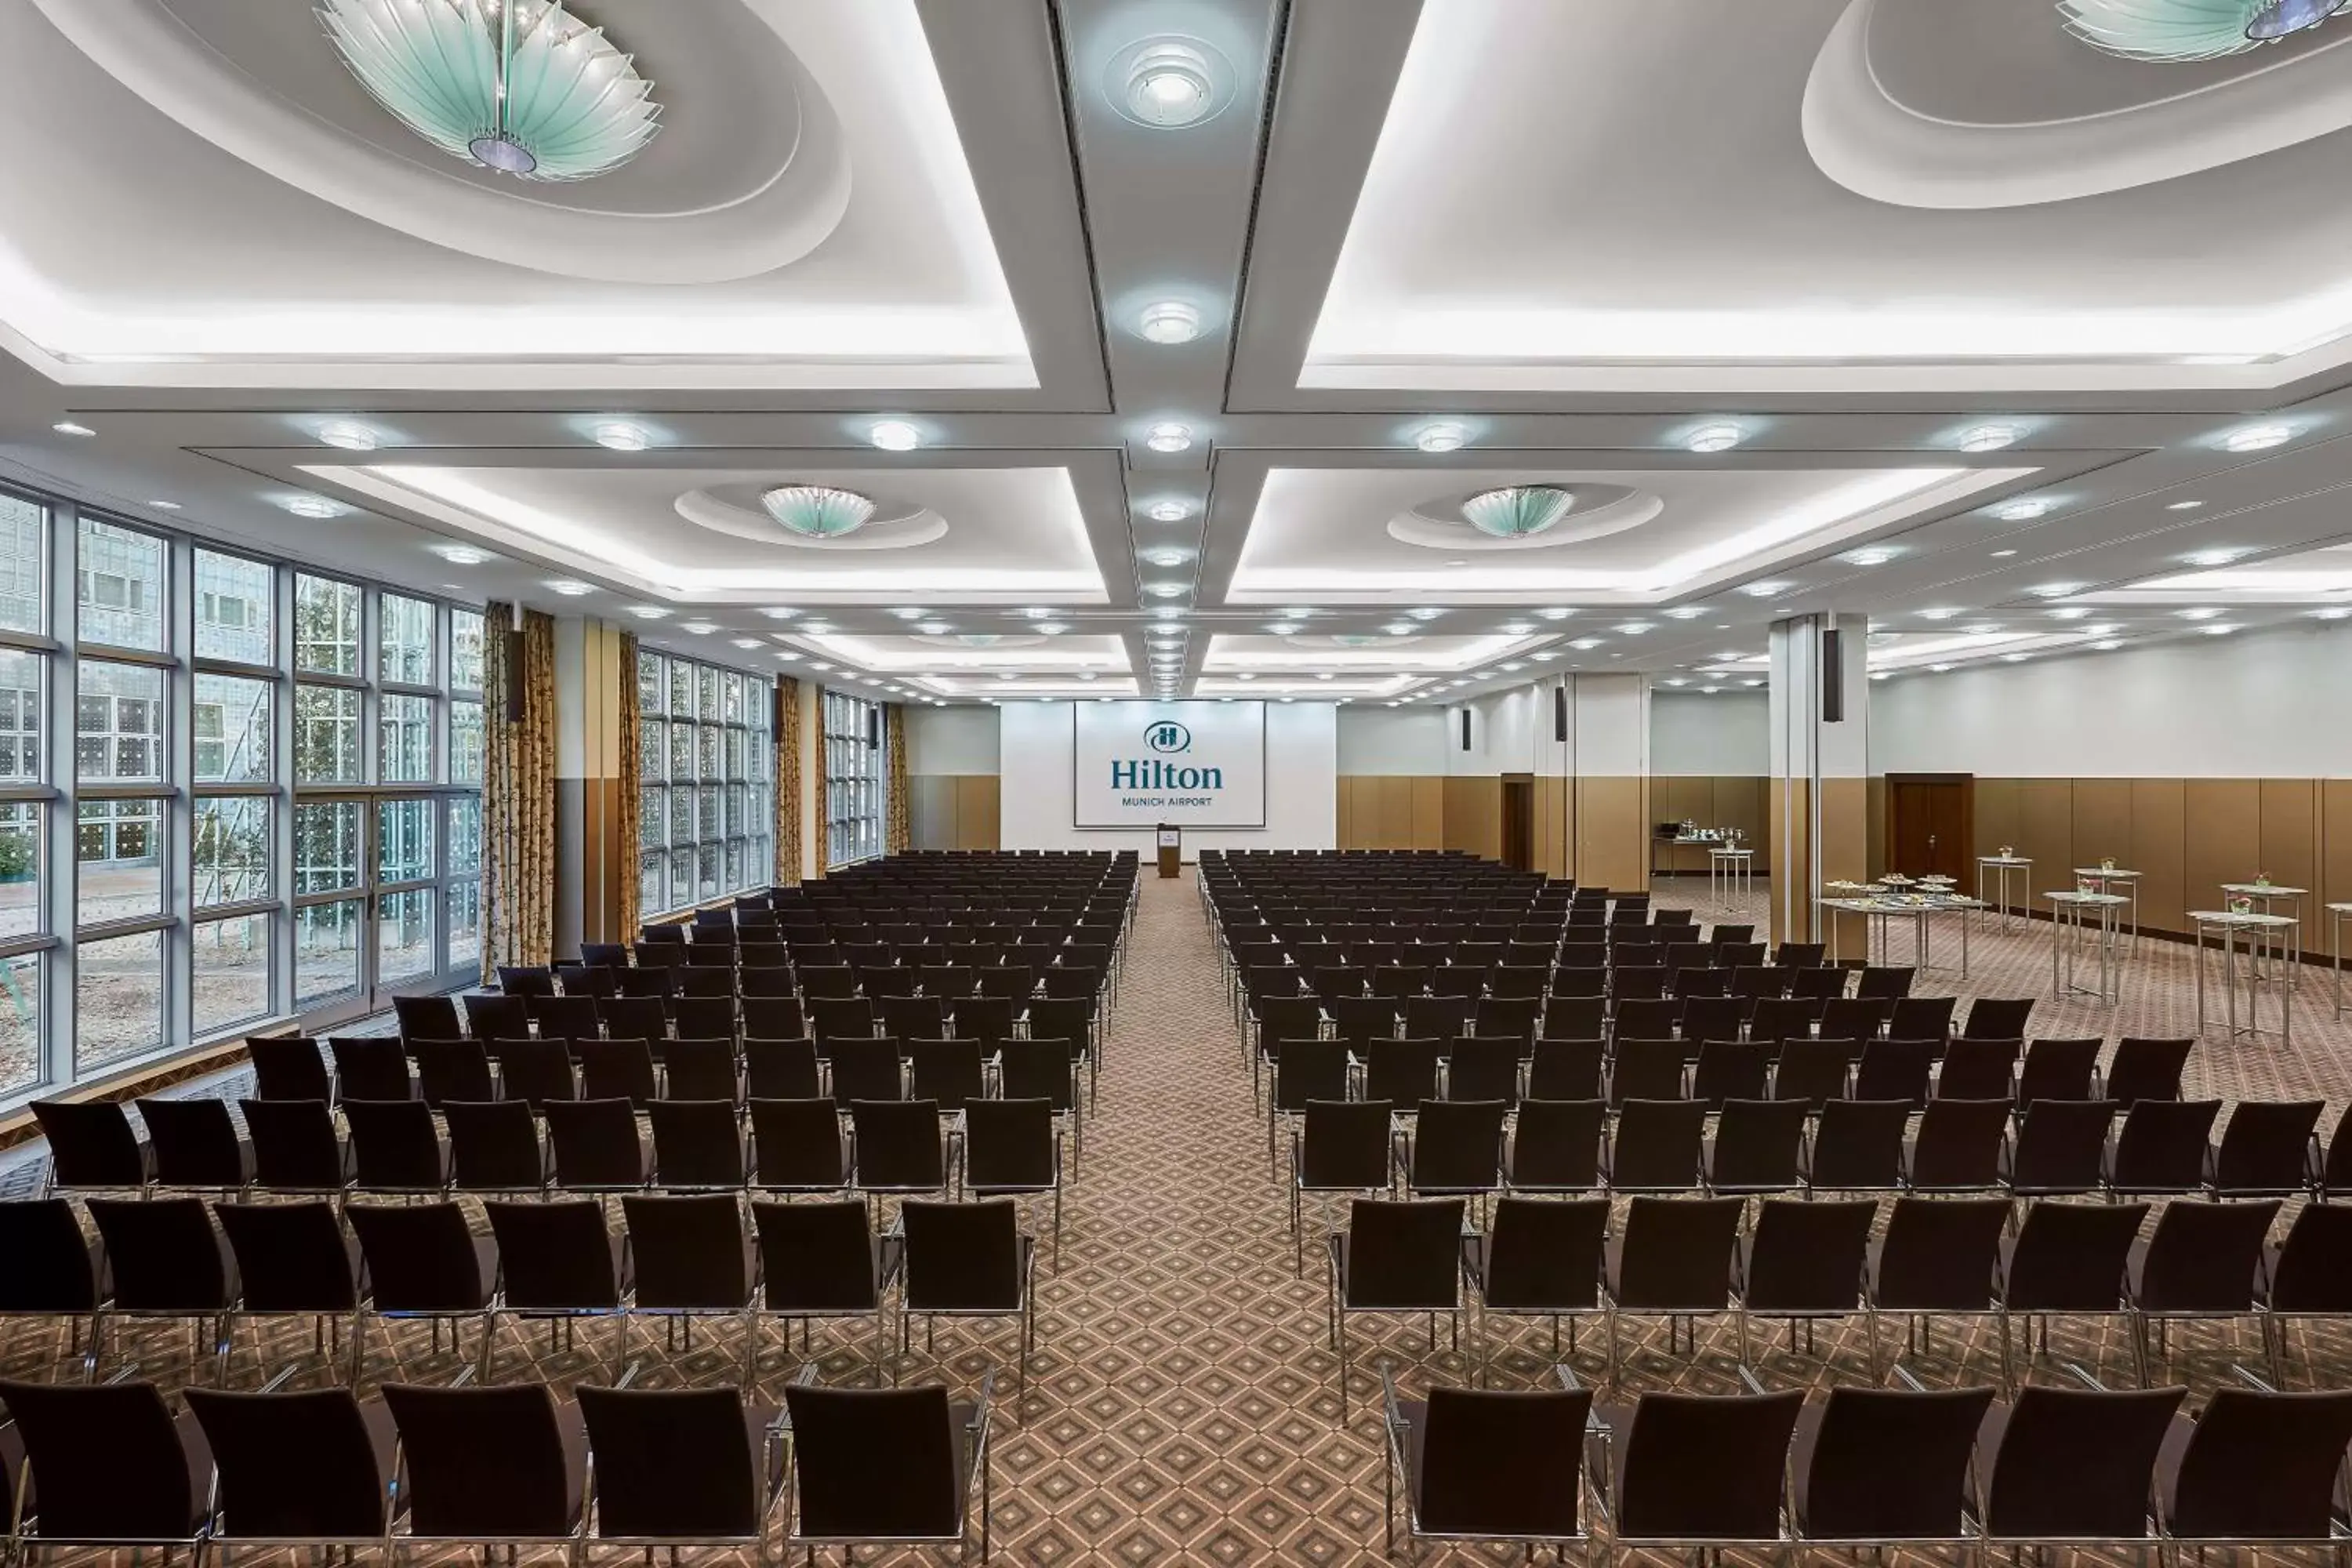 Meeting/conference room in Hilton Munich Airport